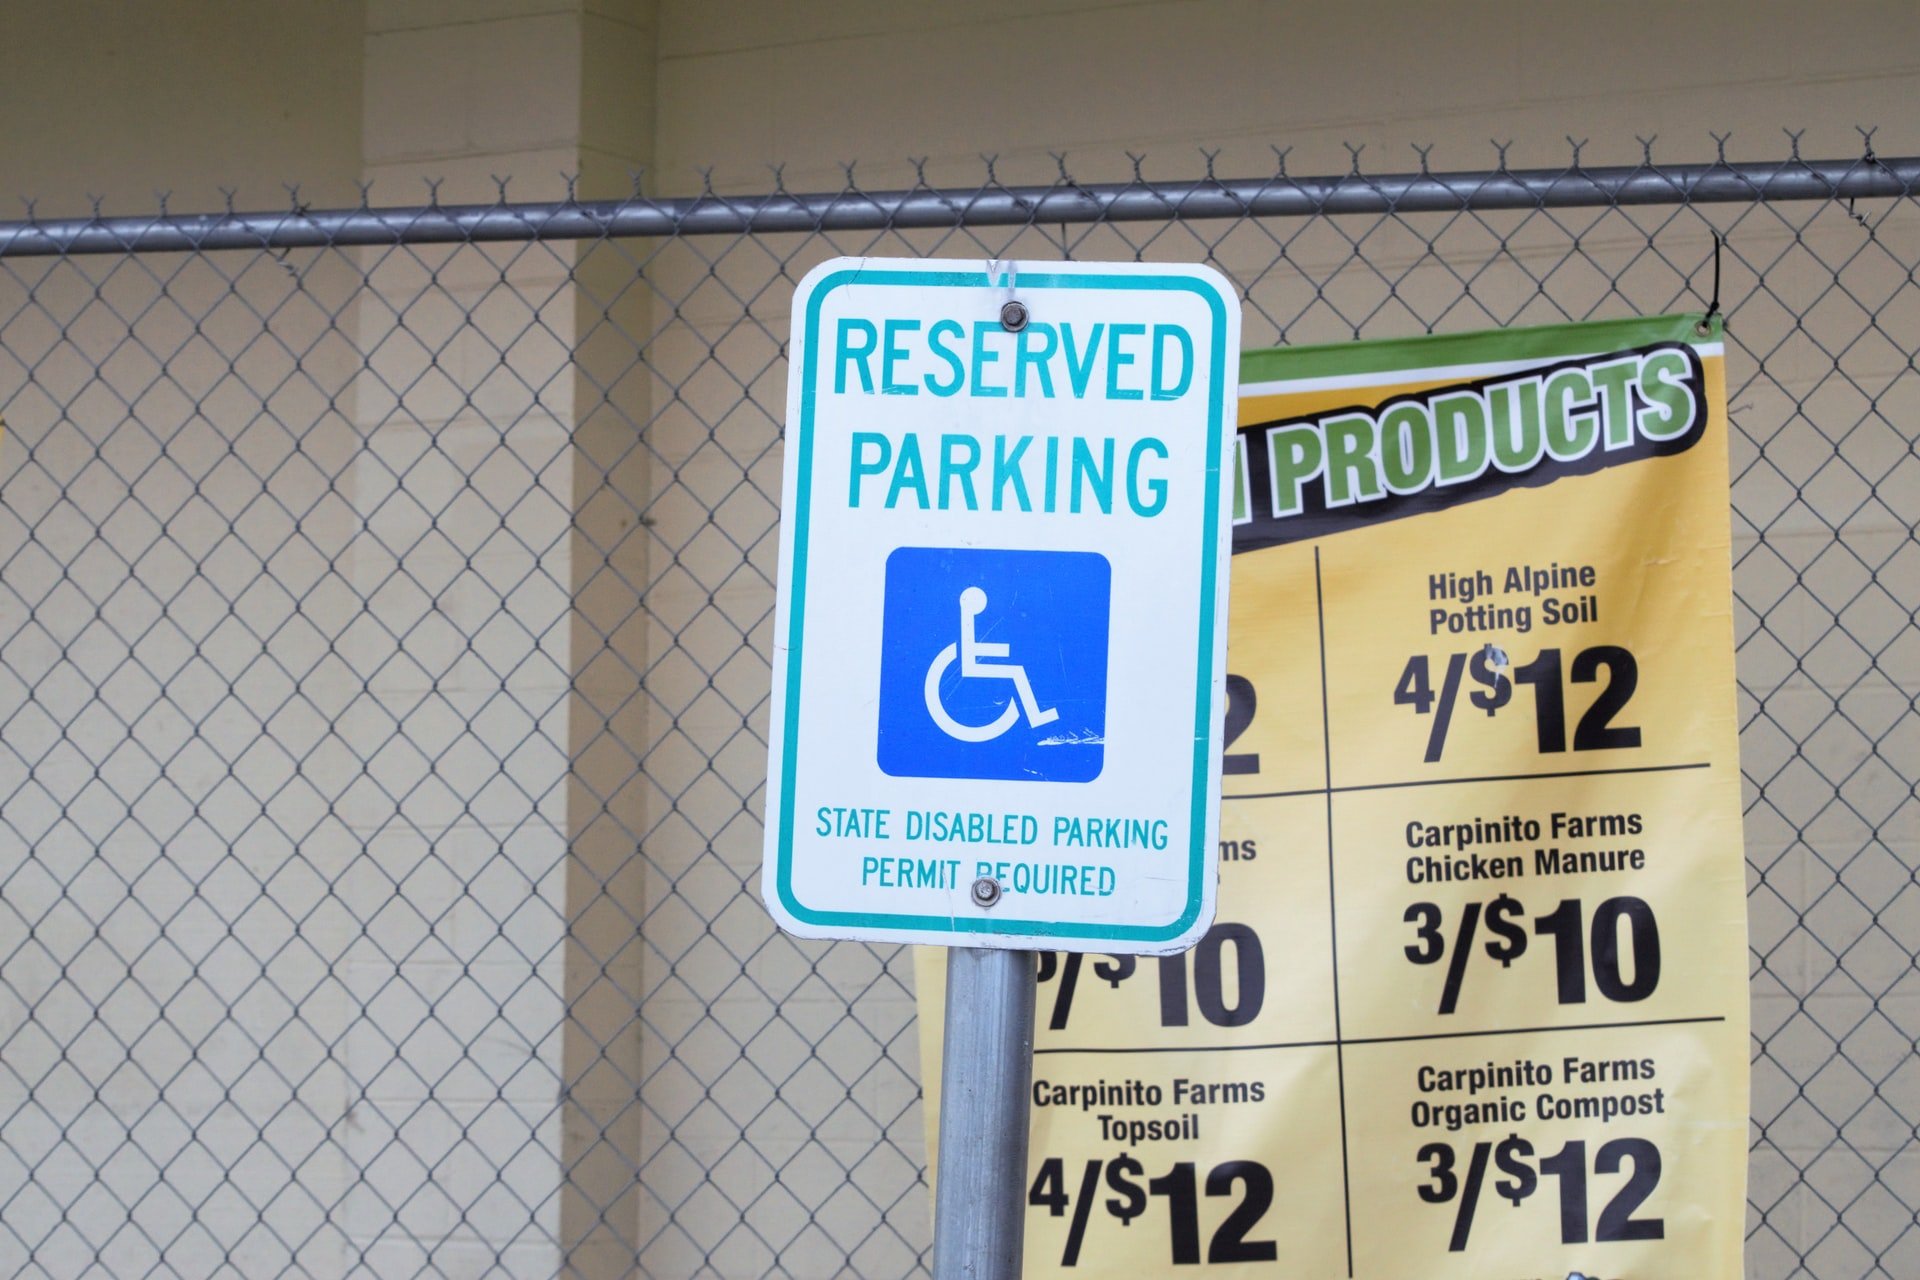 The woman parked in the handicapped parking spot | Source: Unsplash